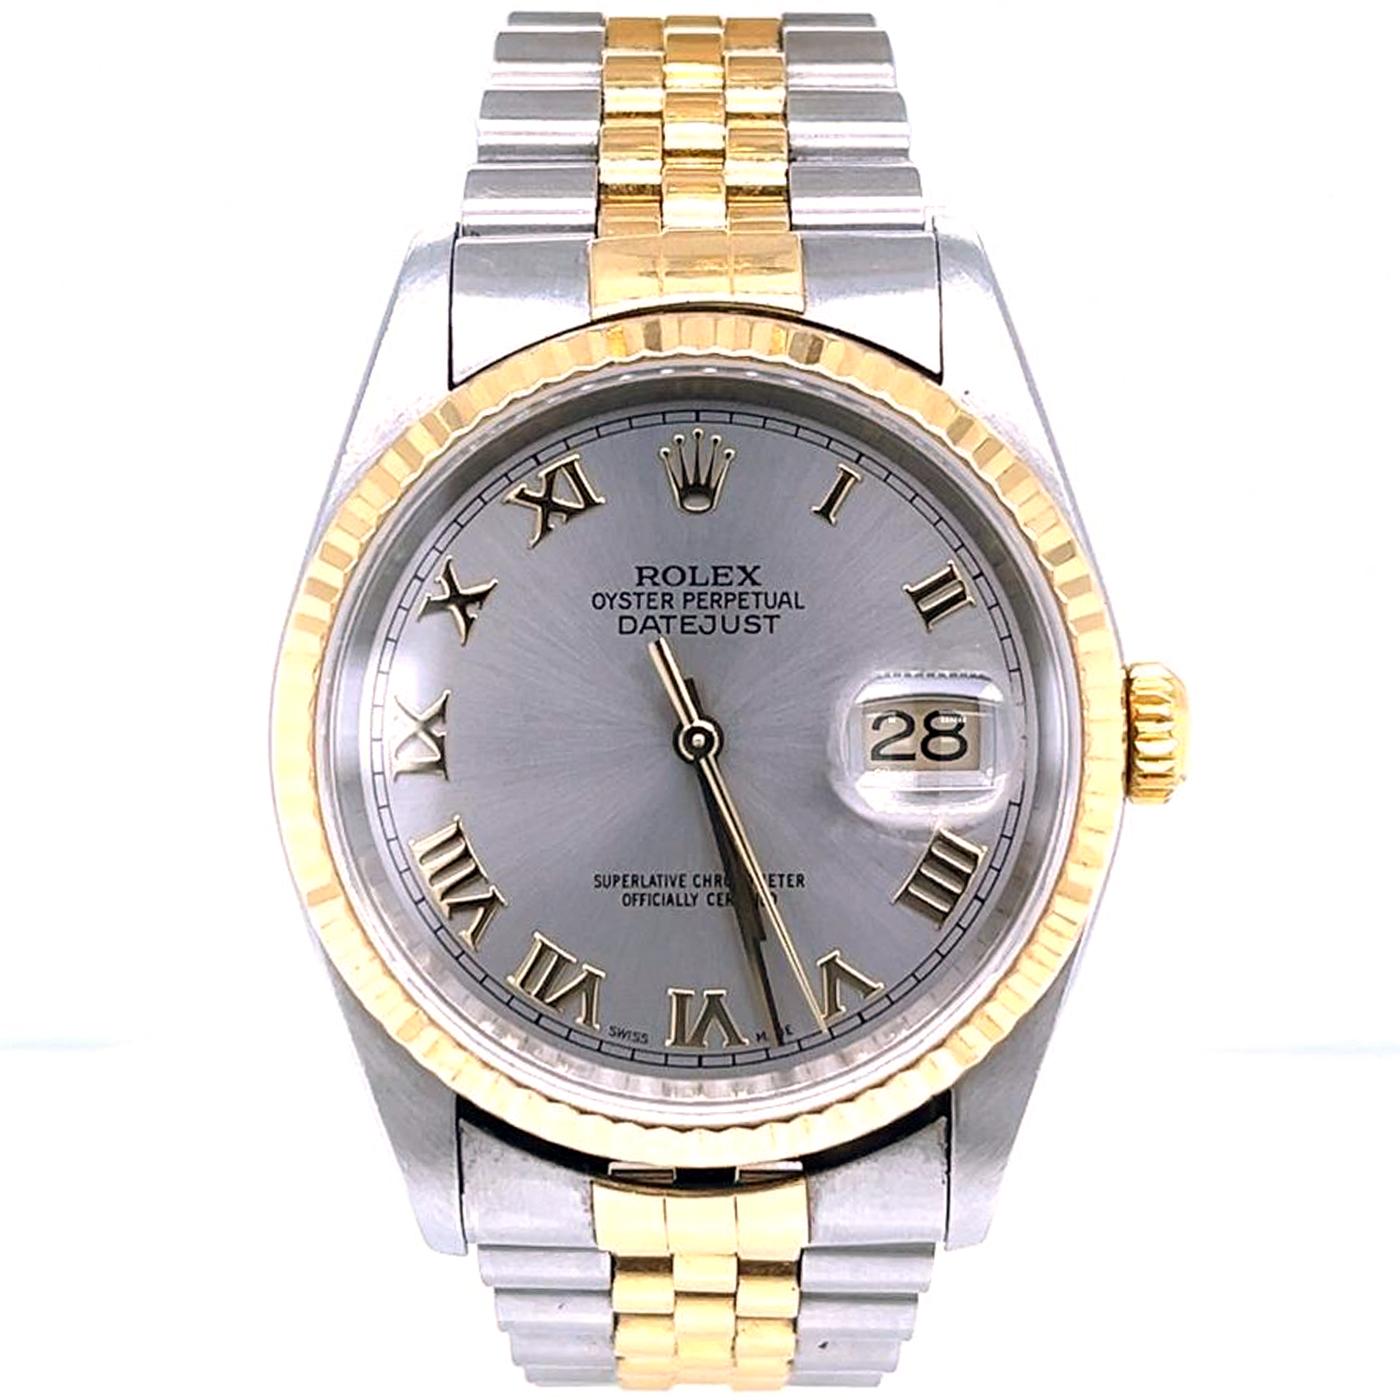 When looking for a distinguished watch, the Rolex Datejust 16233 should be your first port of call. It has featured on many world leaders' wrists. This gents Rolex Datejust 16233 has a 36mm 904L stainless steel case with an 18ct yellow gold fluted